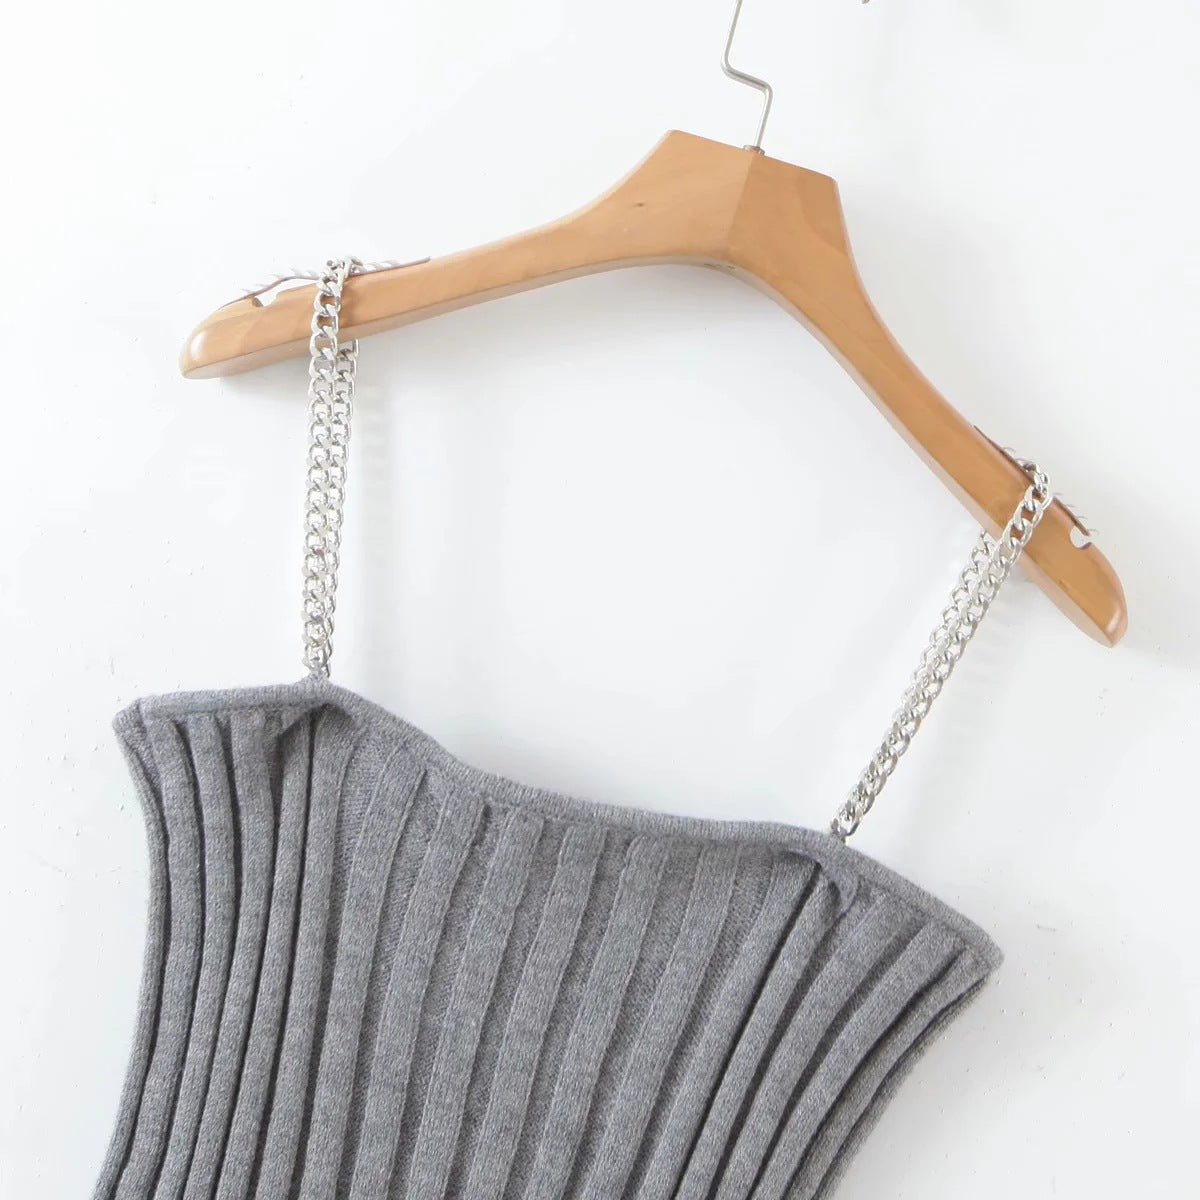 Autumn Women Knitted Straps&sweater Sets